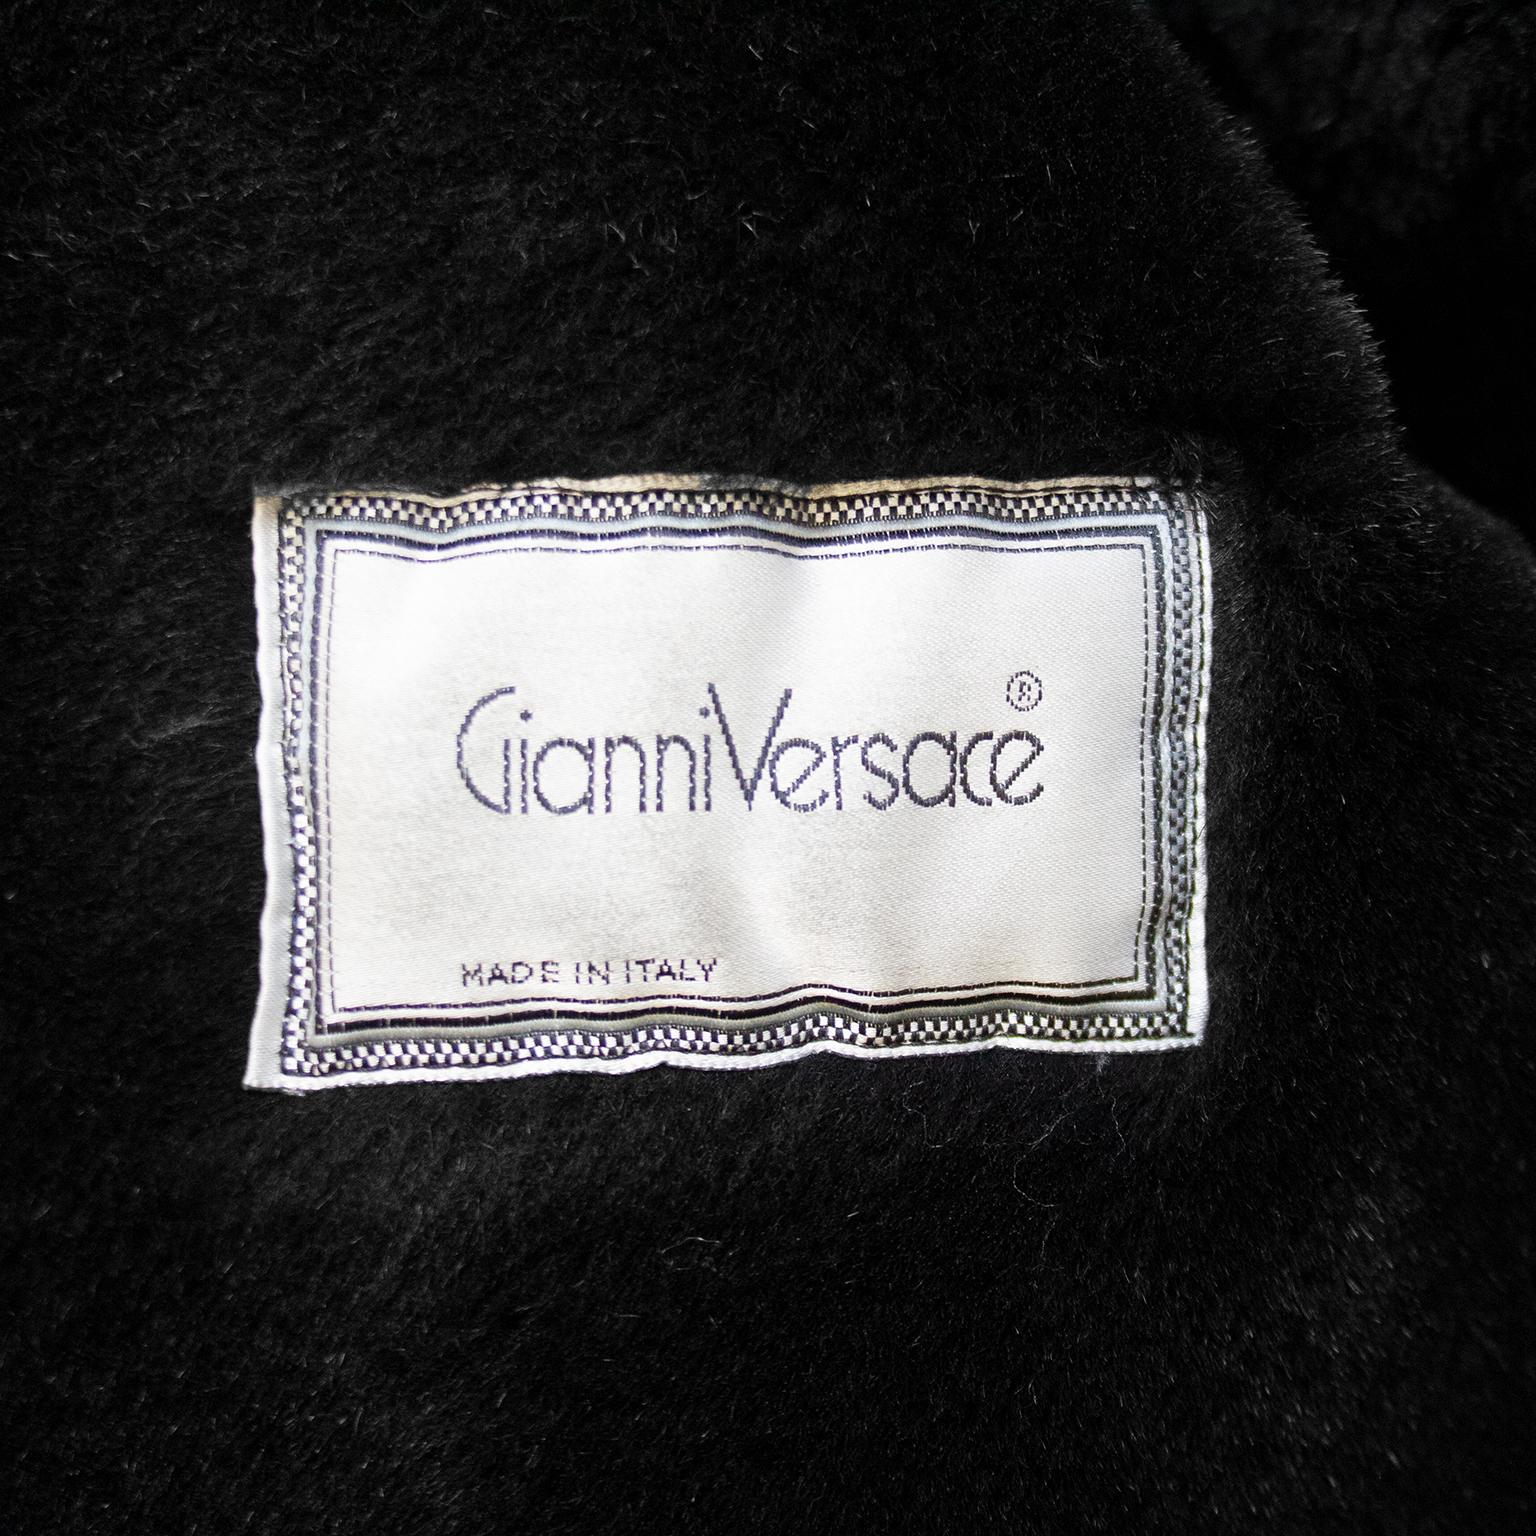 1990s Gianni Versace Black and White Shearling Coat  For Sale 2